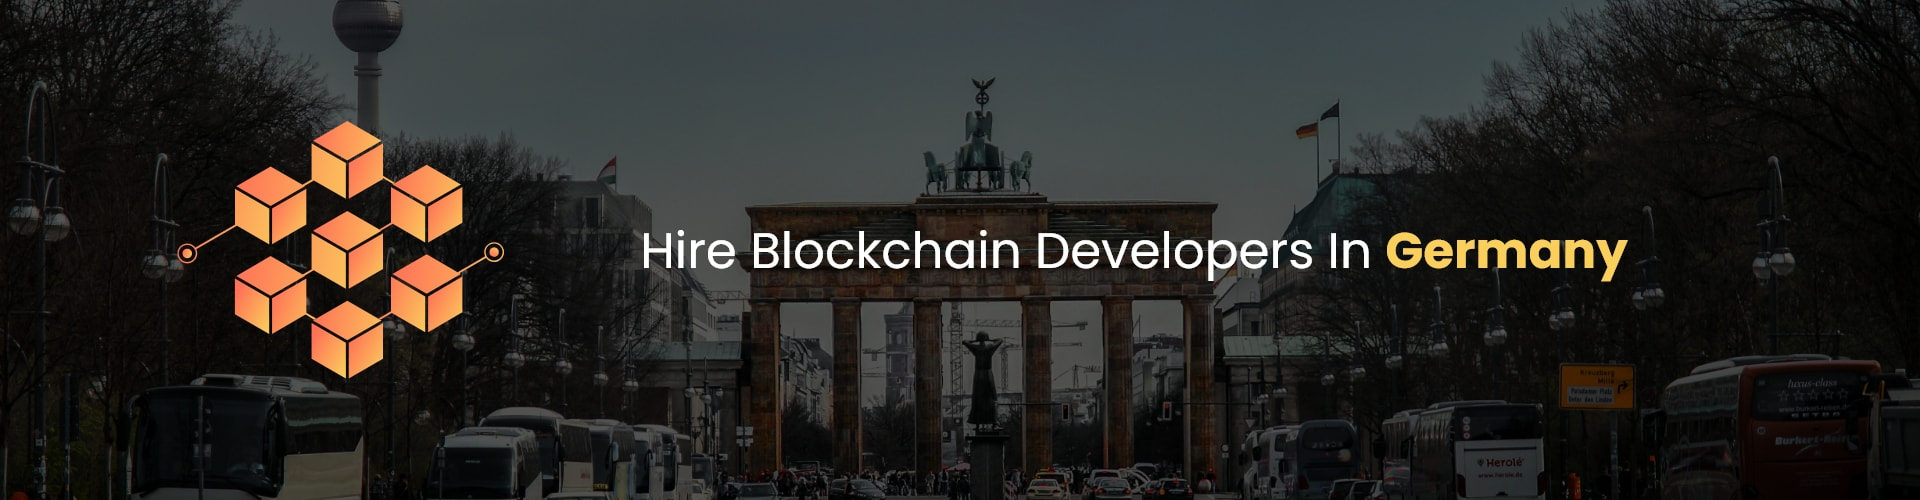 hire blockchain developers in germany